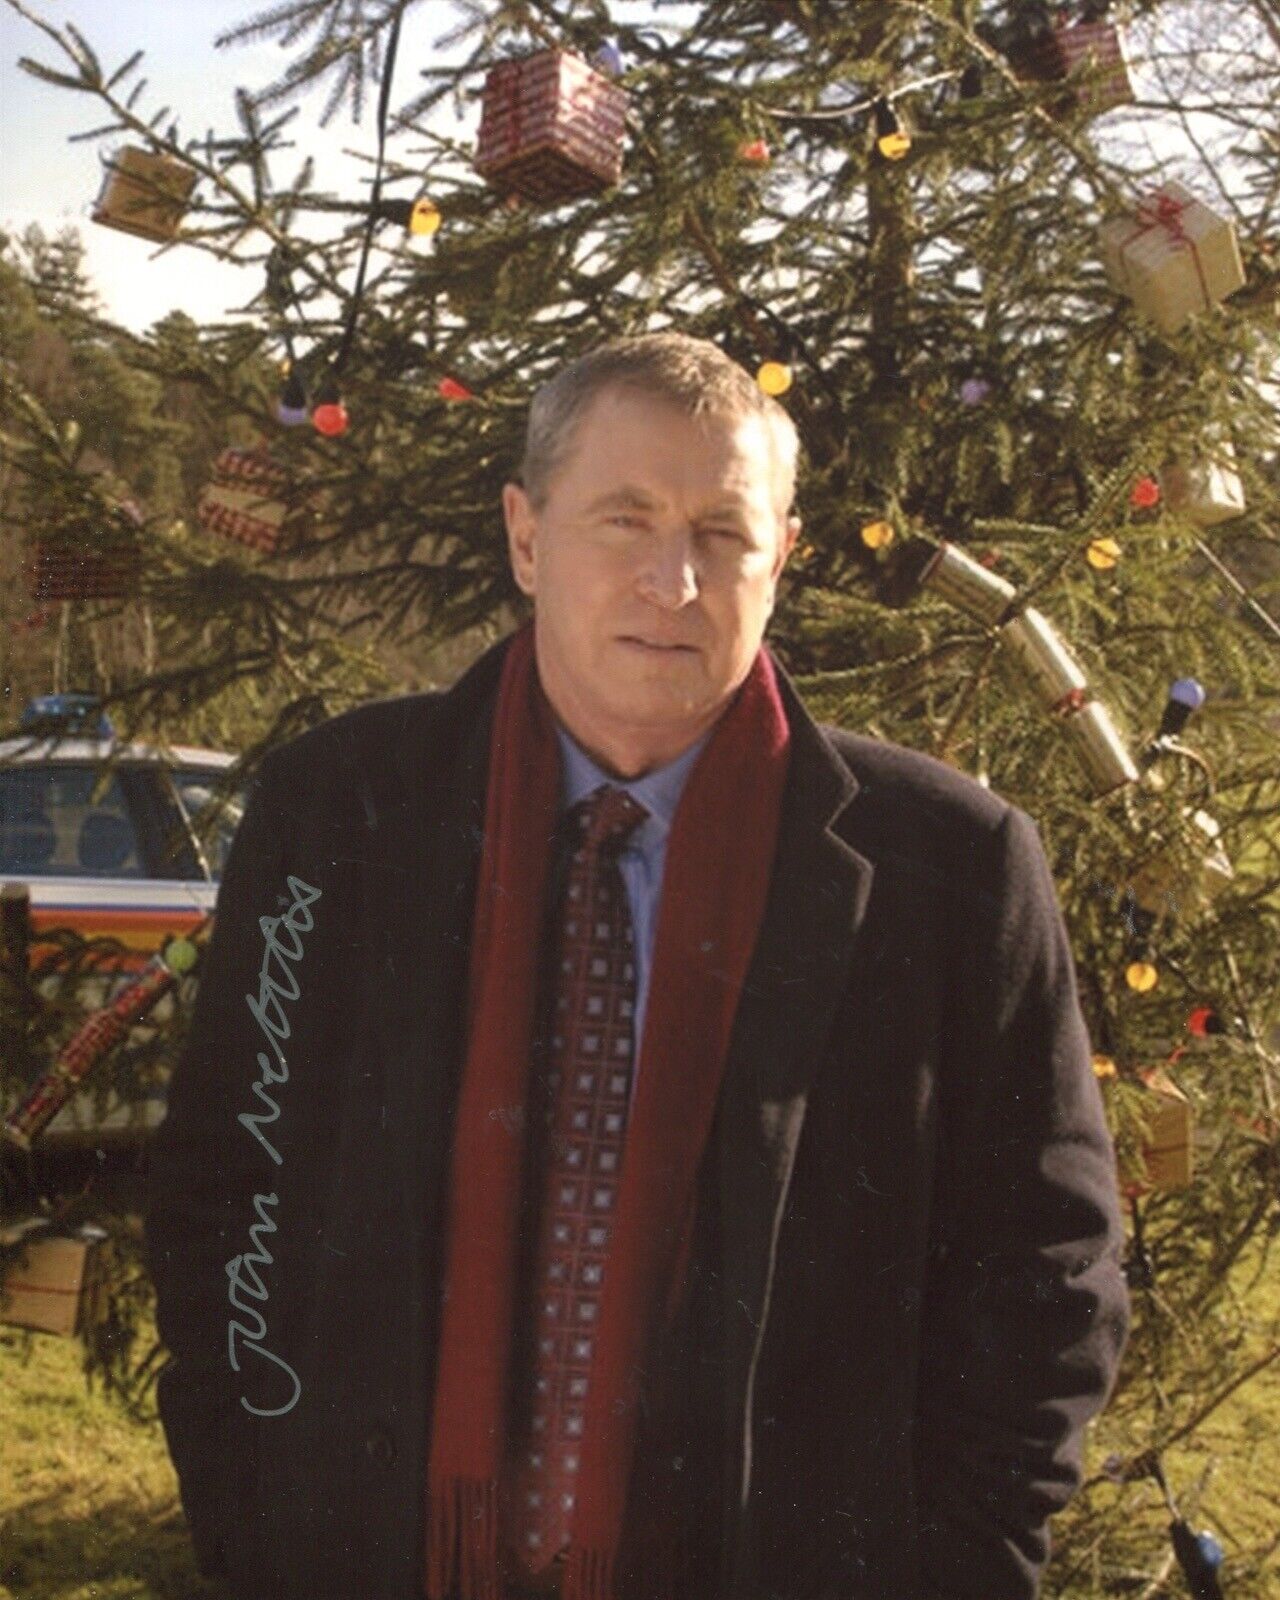 Midsomer Murders 8x10 TV detective Photo Poster painting signed by actor John Nettles IMAGE No3